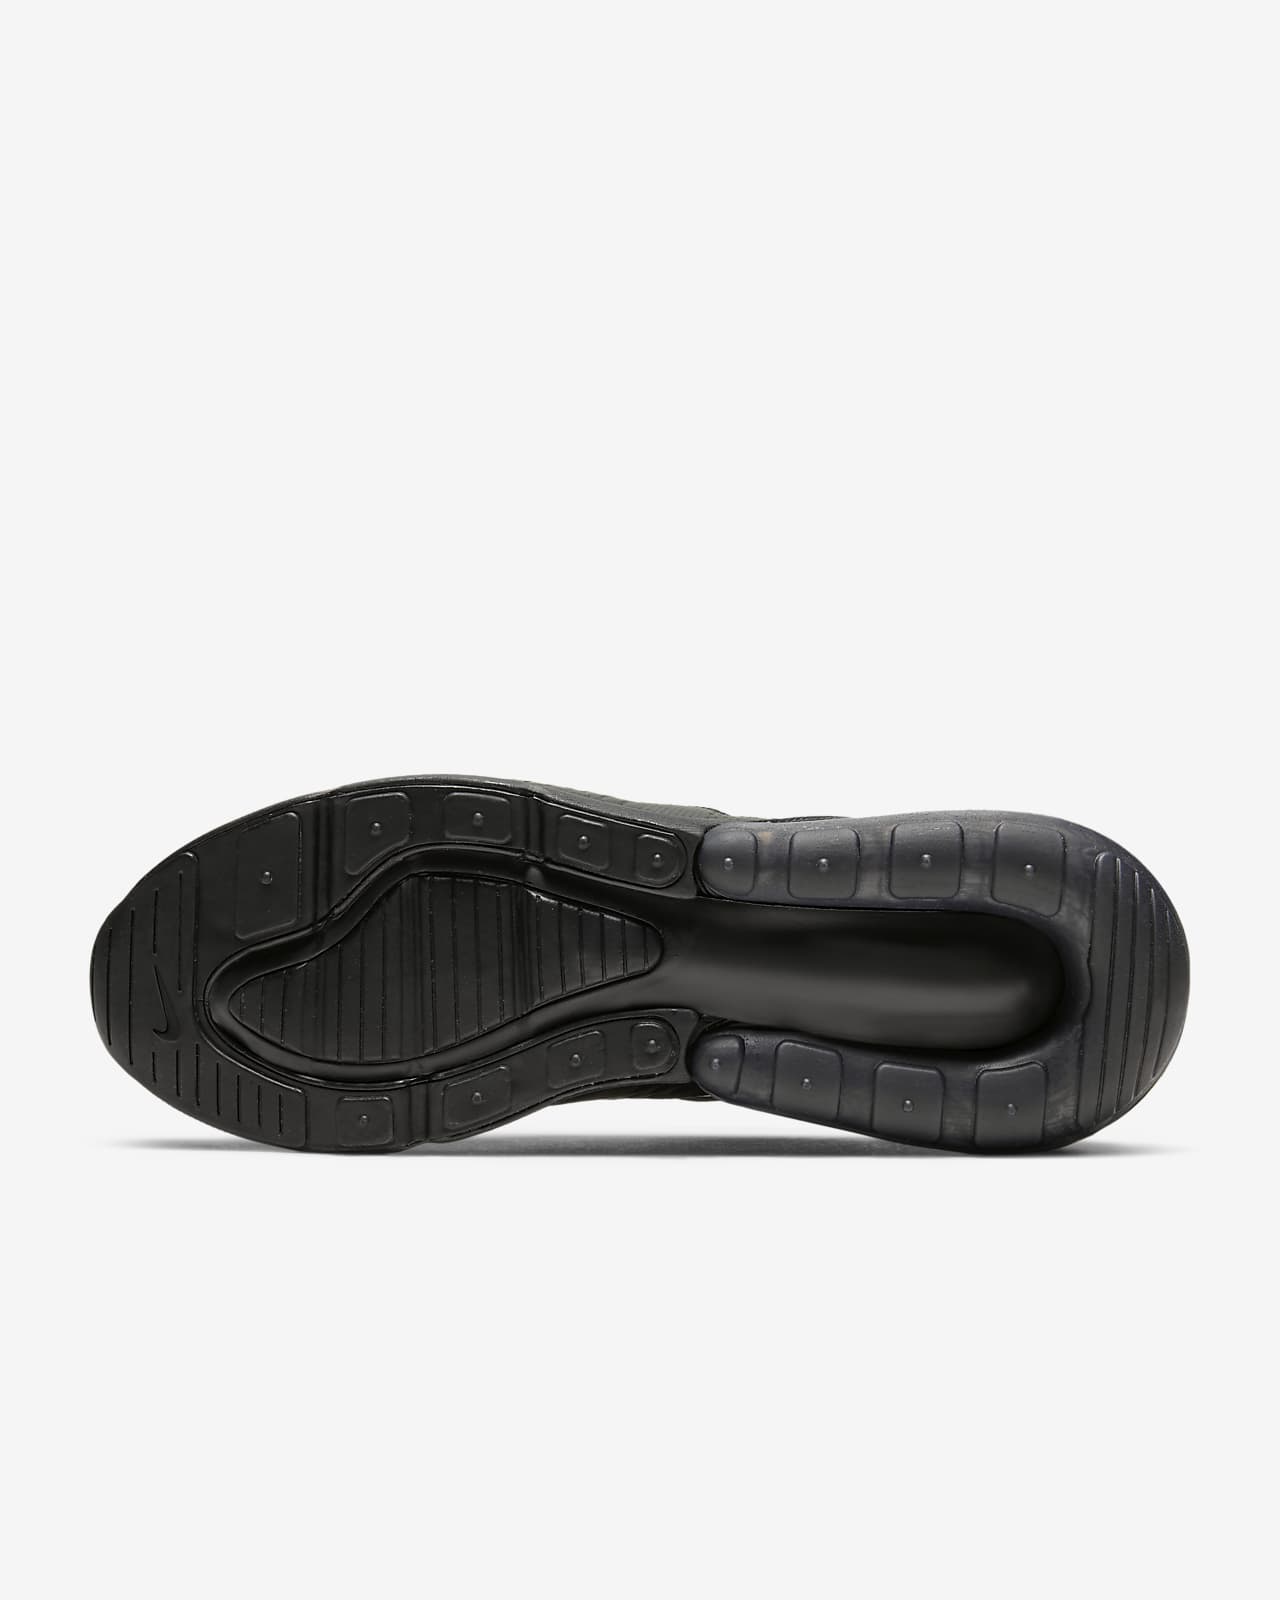 nike shoes with black soles